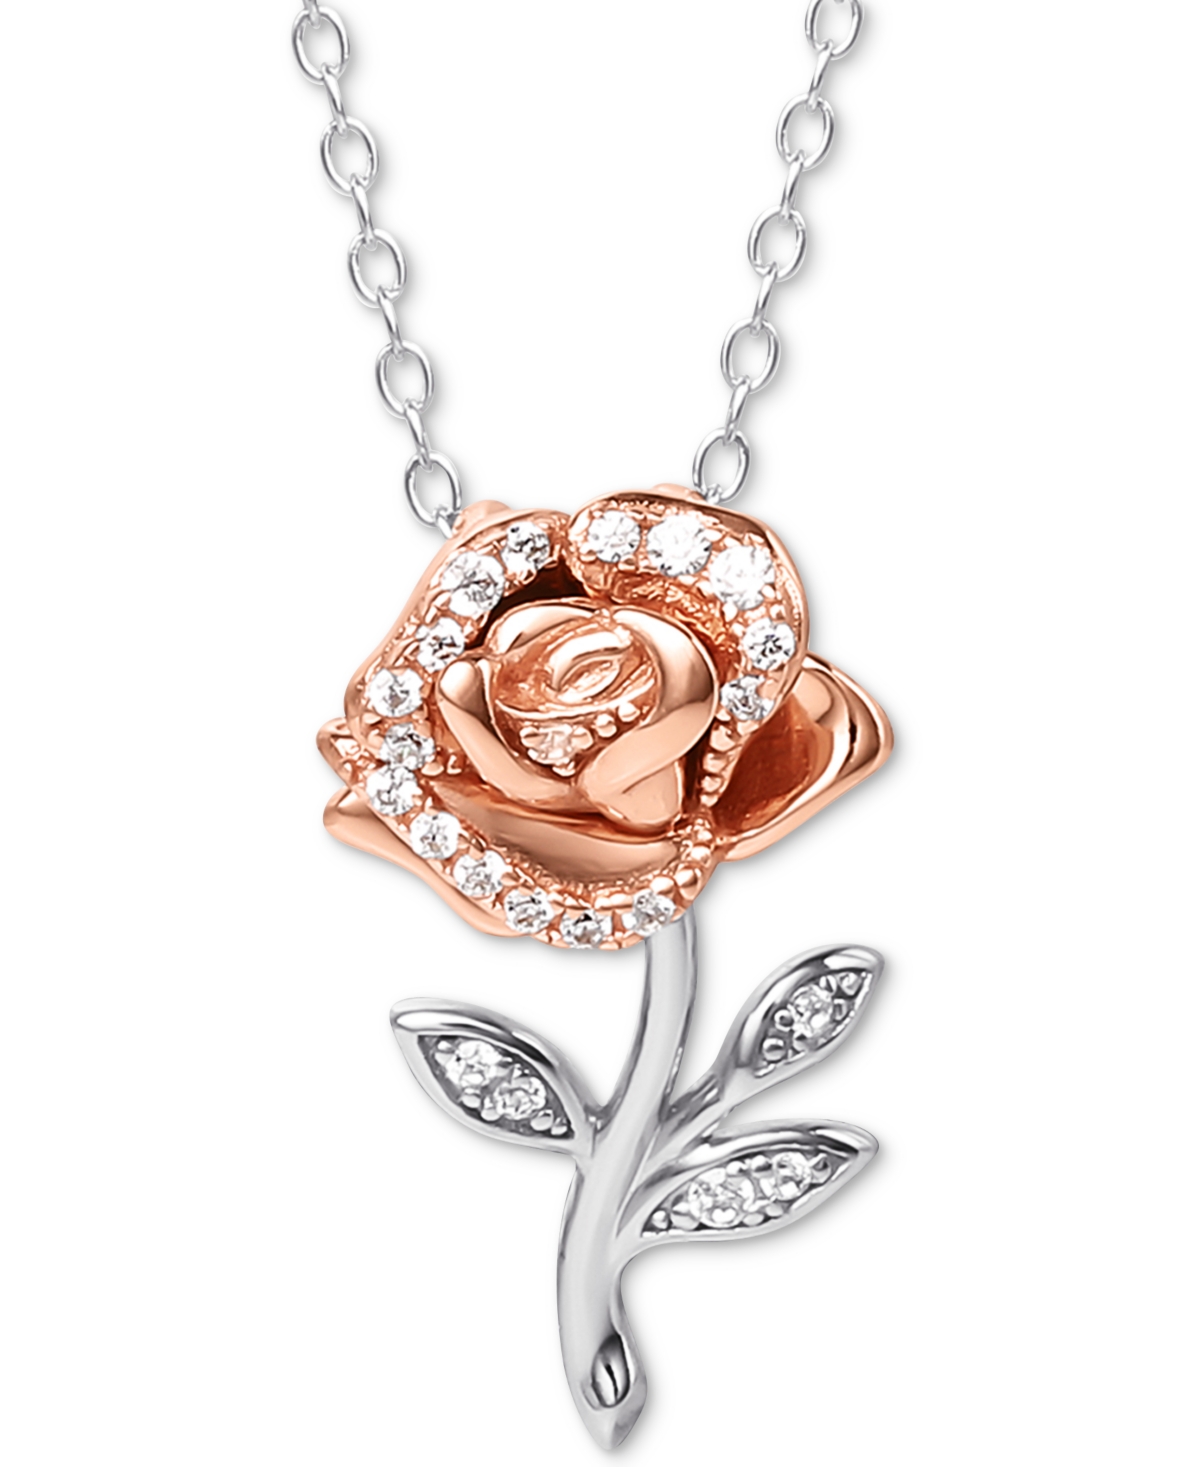 Cubic Zirconia Rose 18" Pendant Necklace in Sterling Silver & 18k Rose Gold-Plate - Sterling Silver